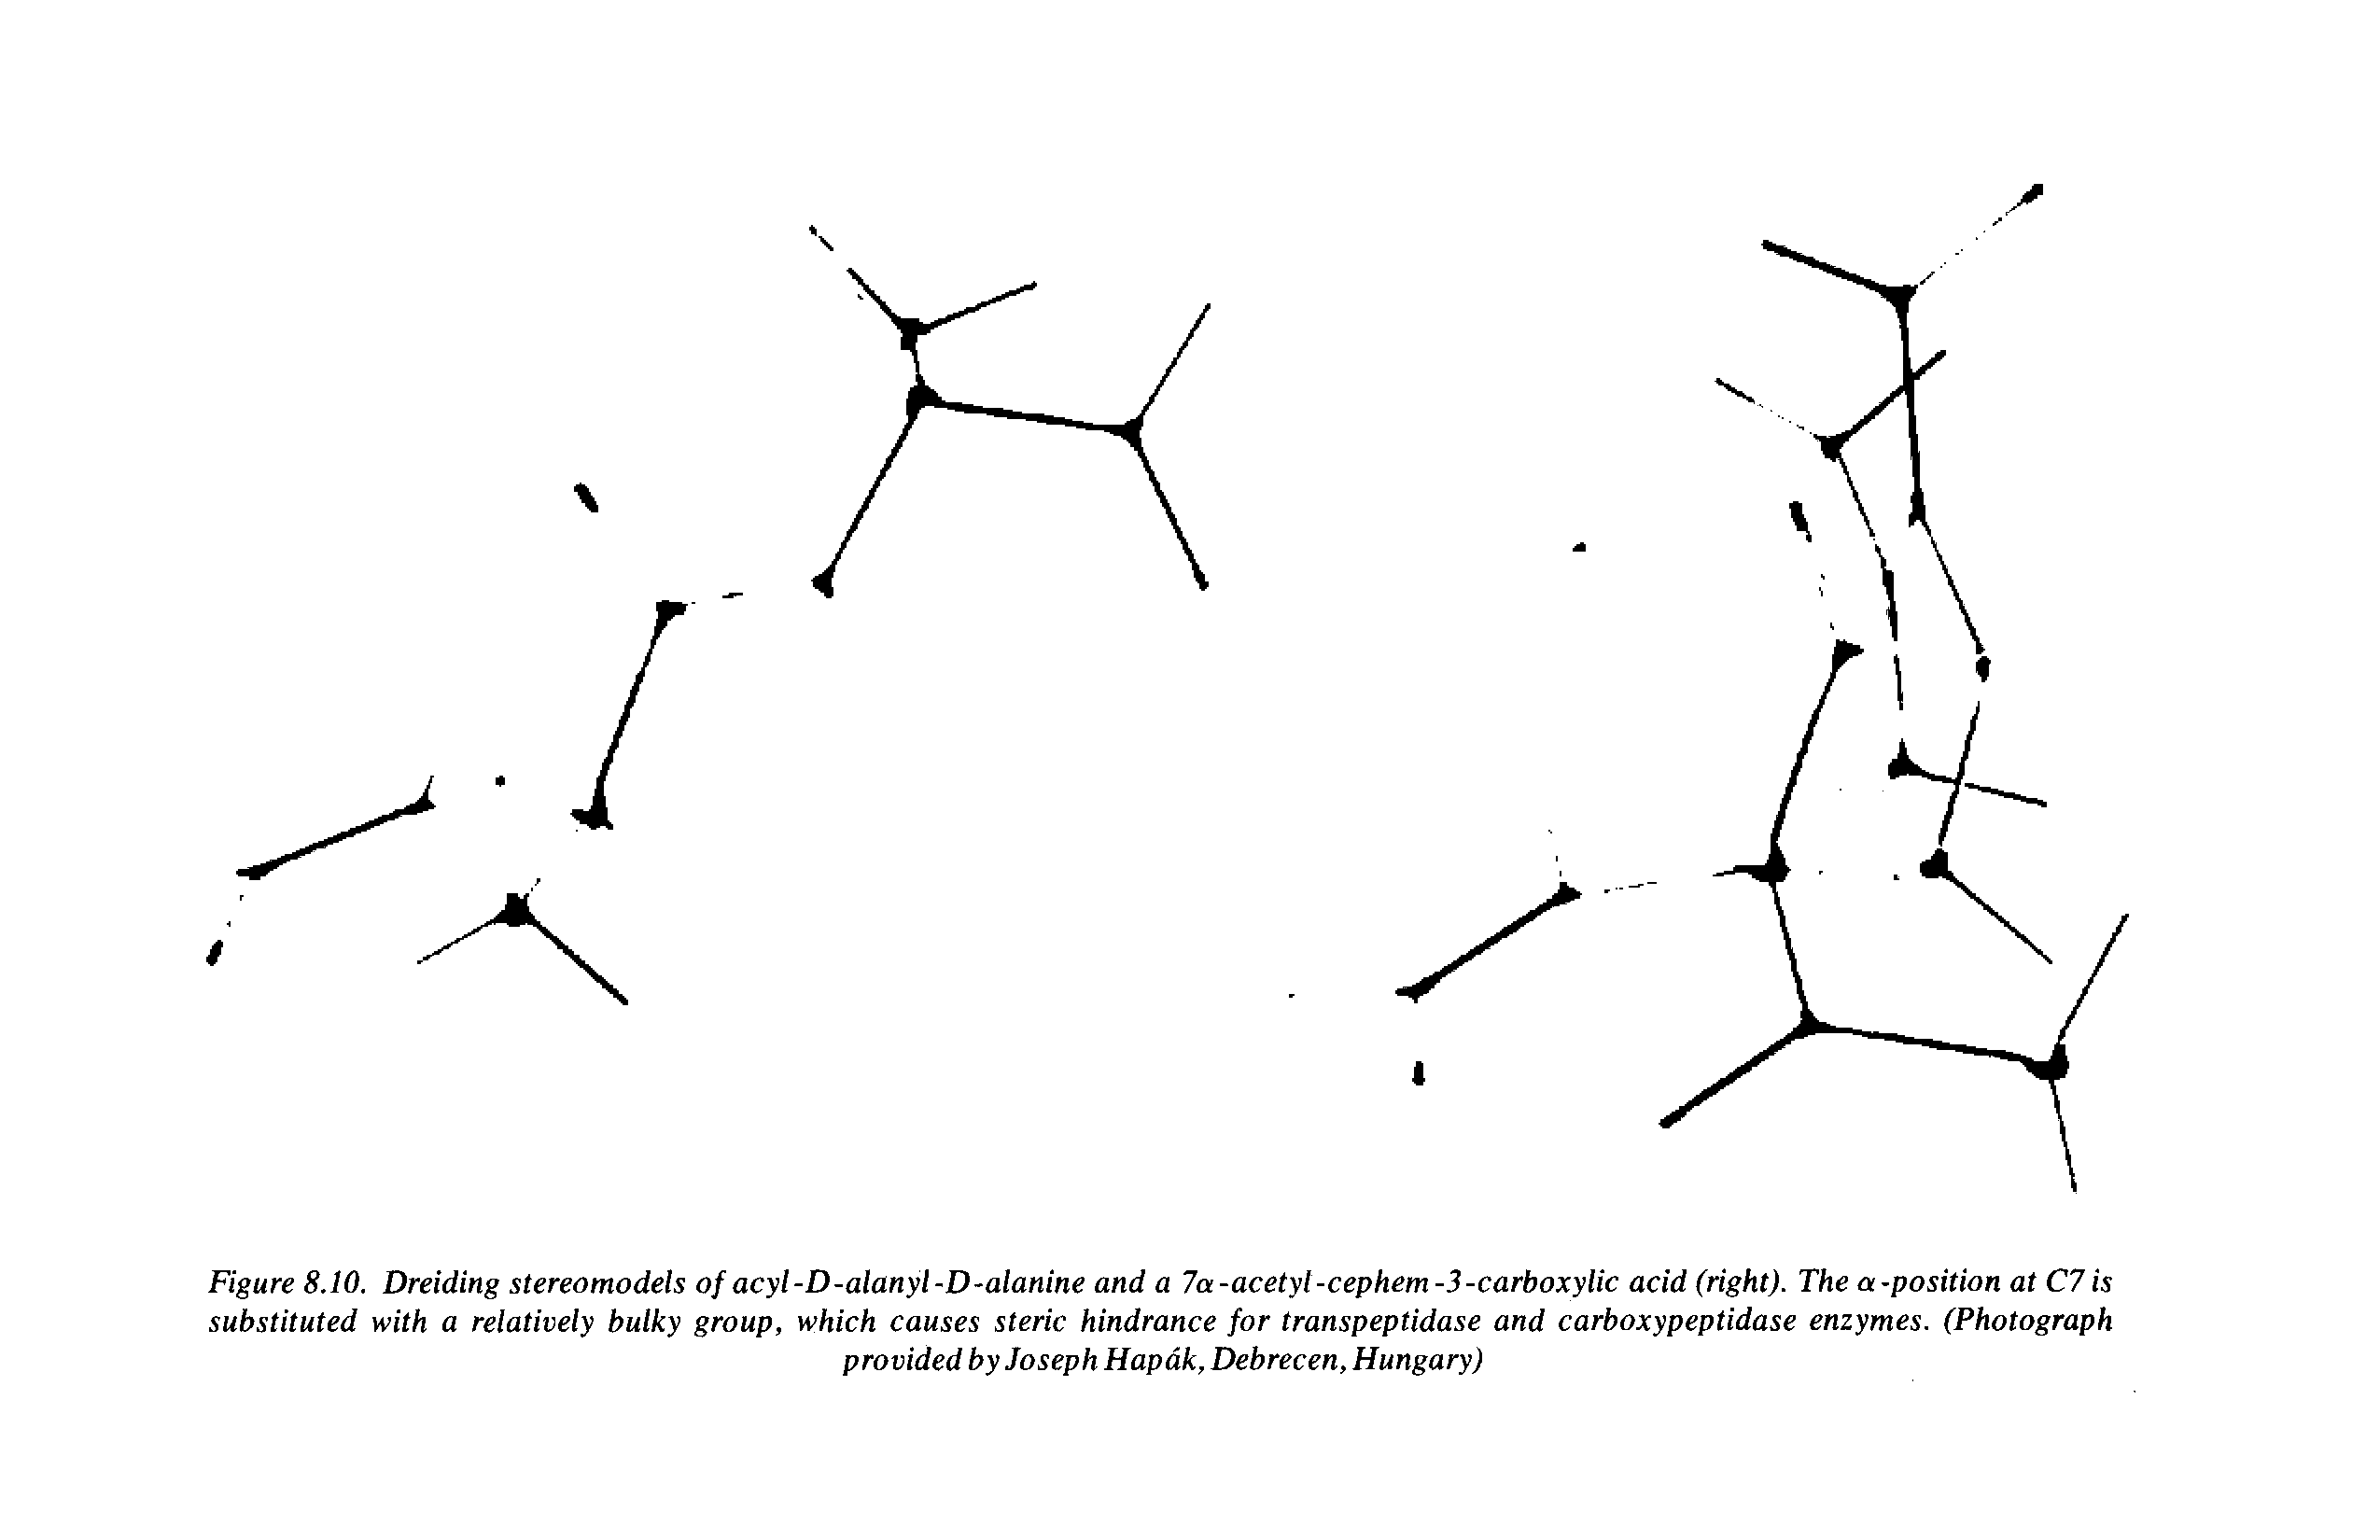 Figure 8.10. Dreiding stereomodels of acyl-D-alanyl-D-alanine and a 7a-acetyl-cephem-3-carboxylic acid (right). The a-position at C7 is substituted with a relatively bulky group, which causes steric hindrance for transpeptidase and carboxypeptidase enzymes. (Photograph...